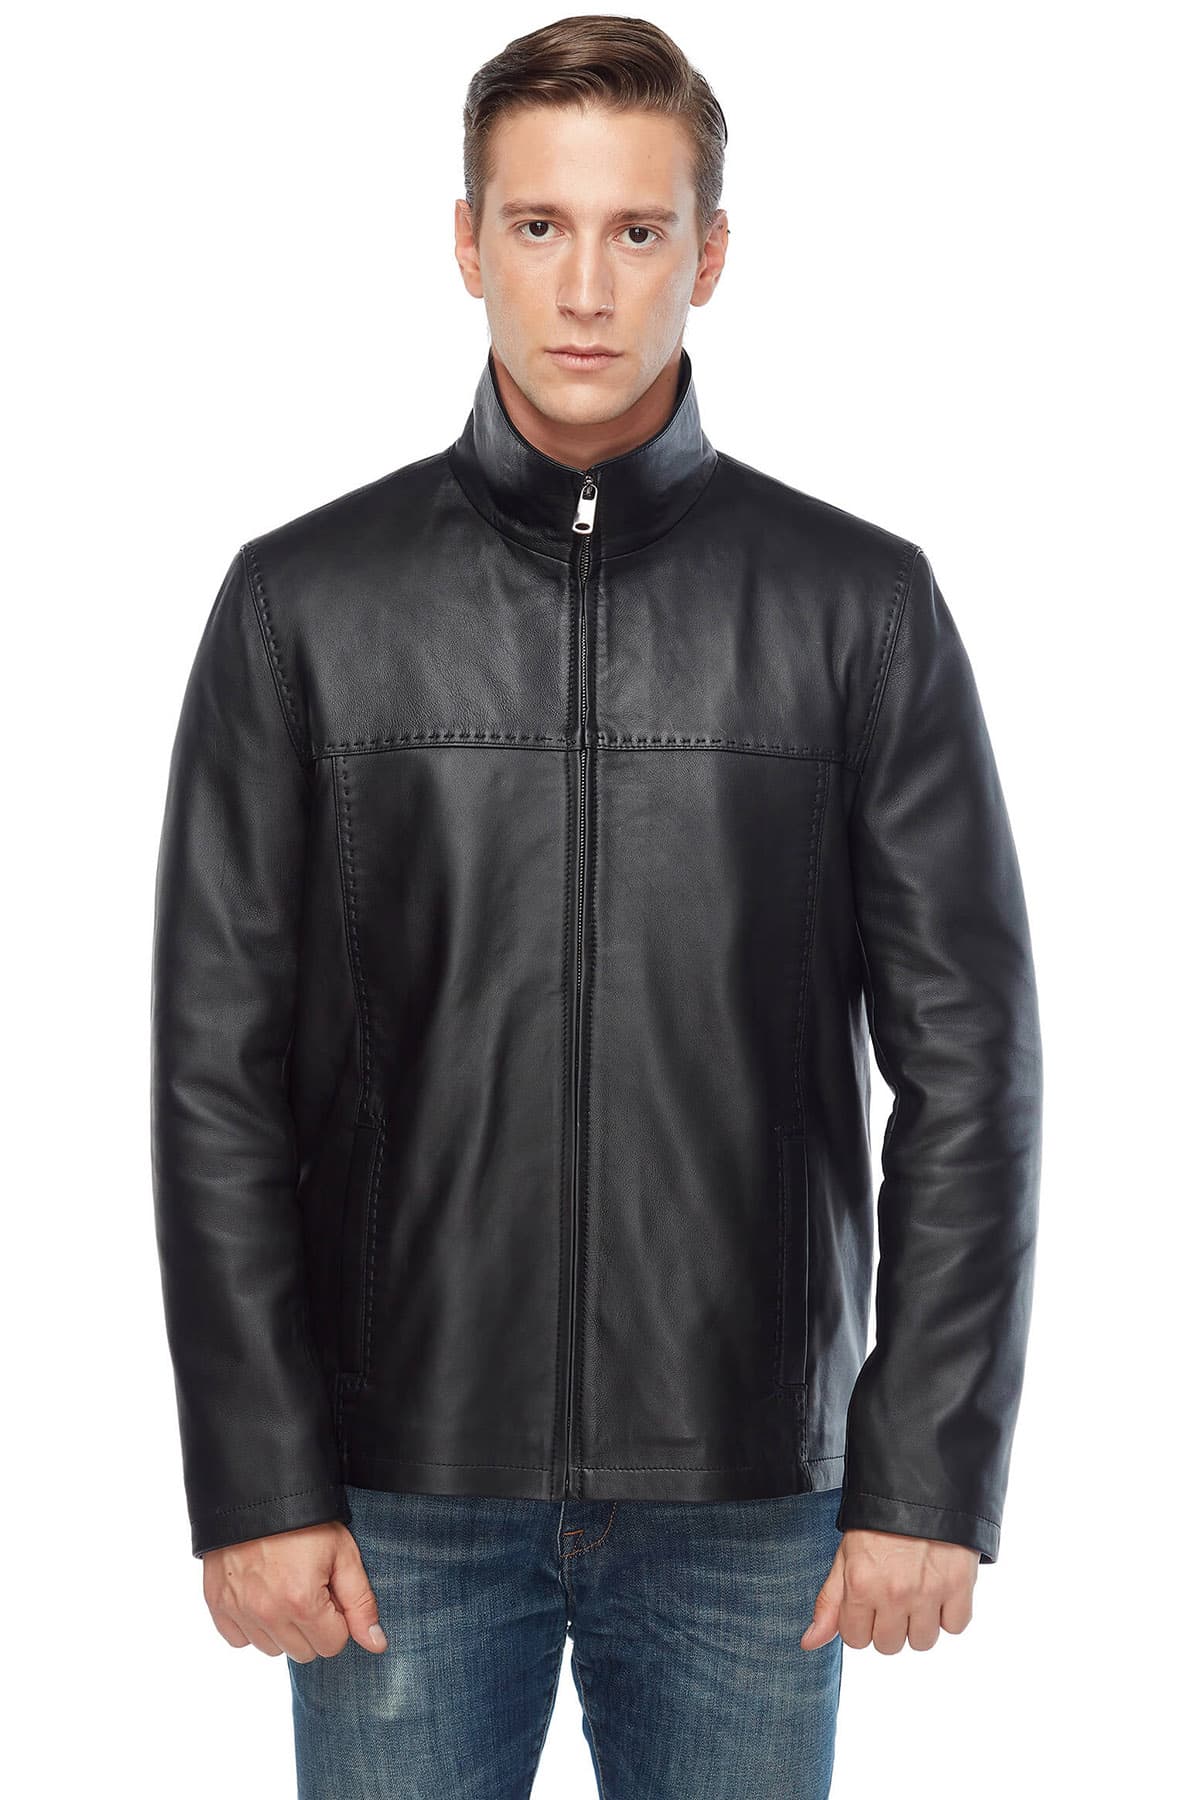 Men's 100 % Real Black Leather Puffer Jacket